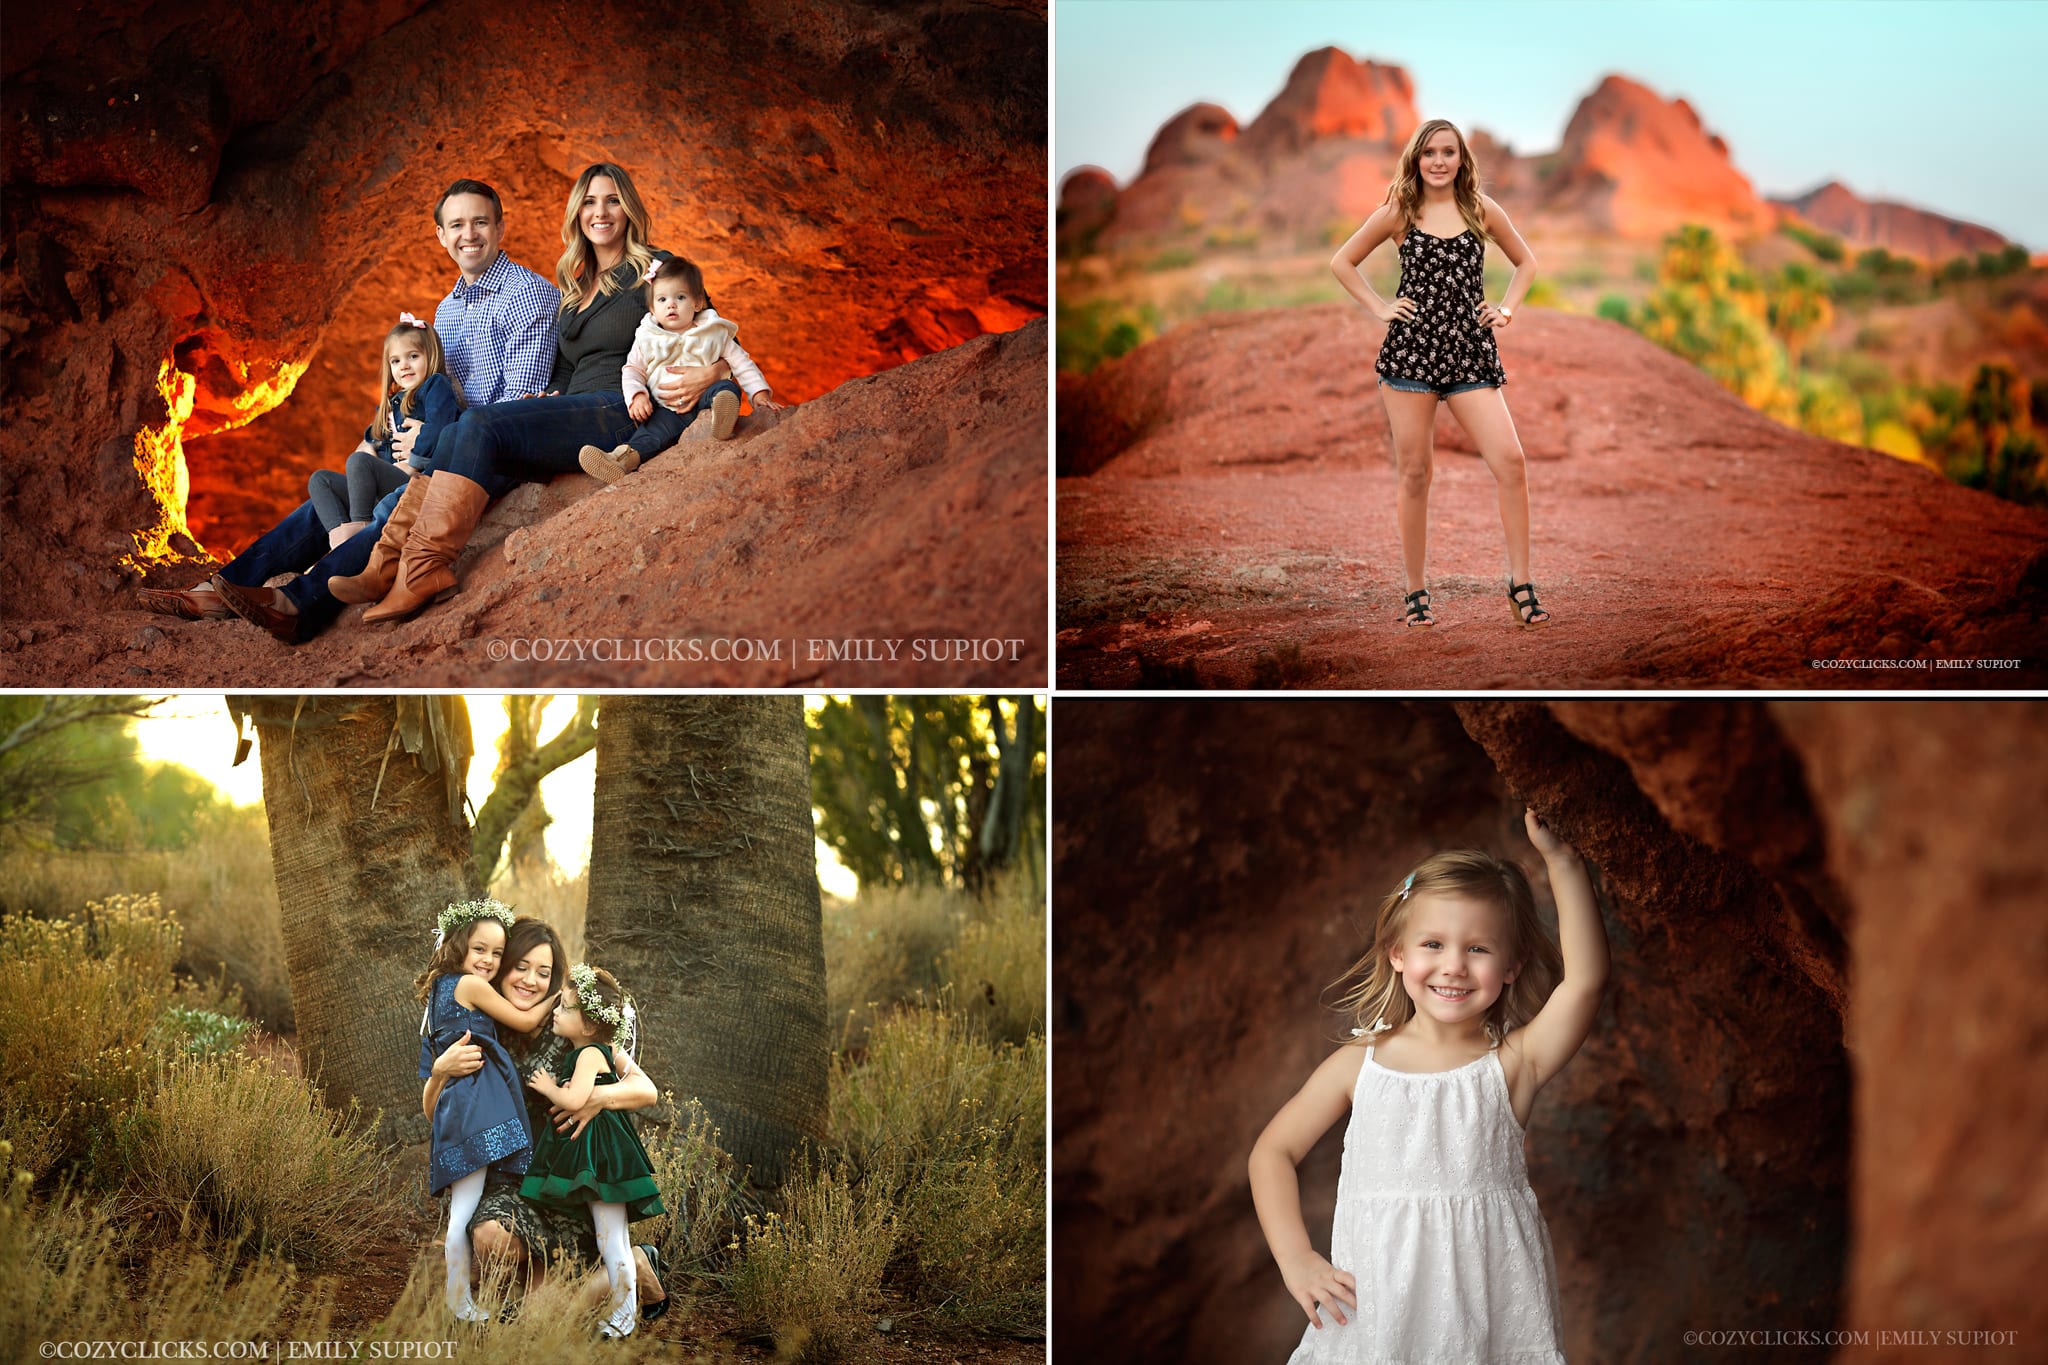 Papago Park is a great spot for fmaily portraits in Phoenix, Arizona